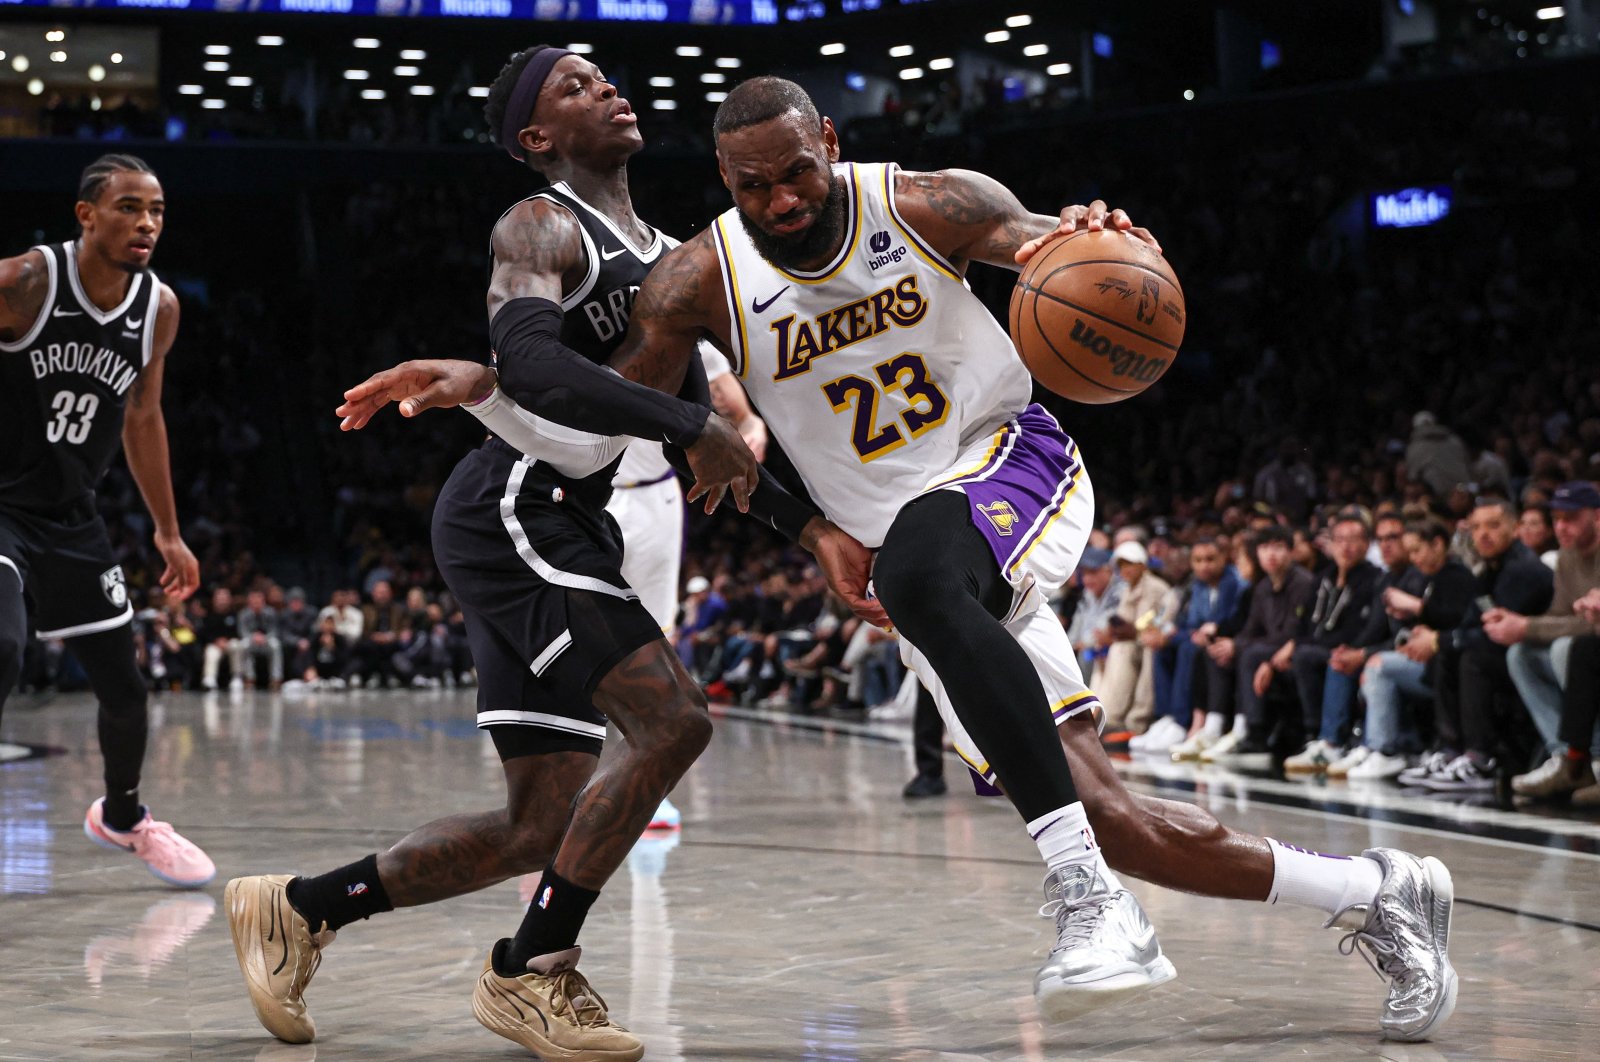 LeBron scores 40 points, hits 9 threes in Lakers’ win over Nets